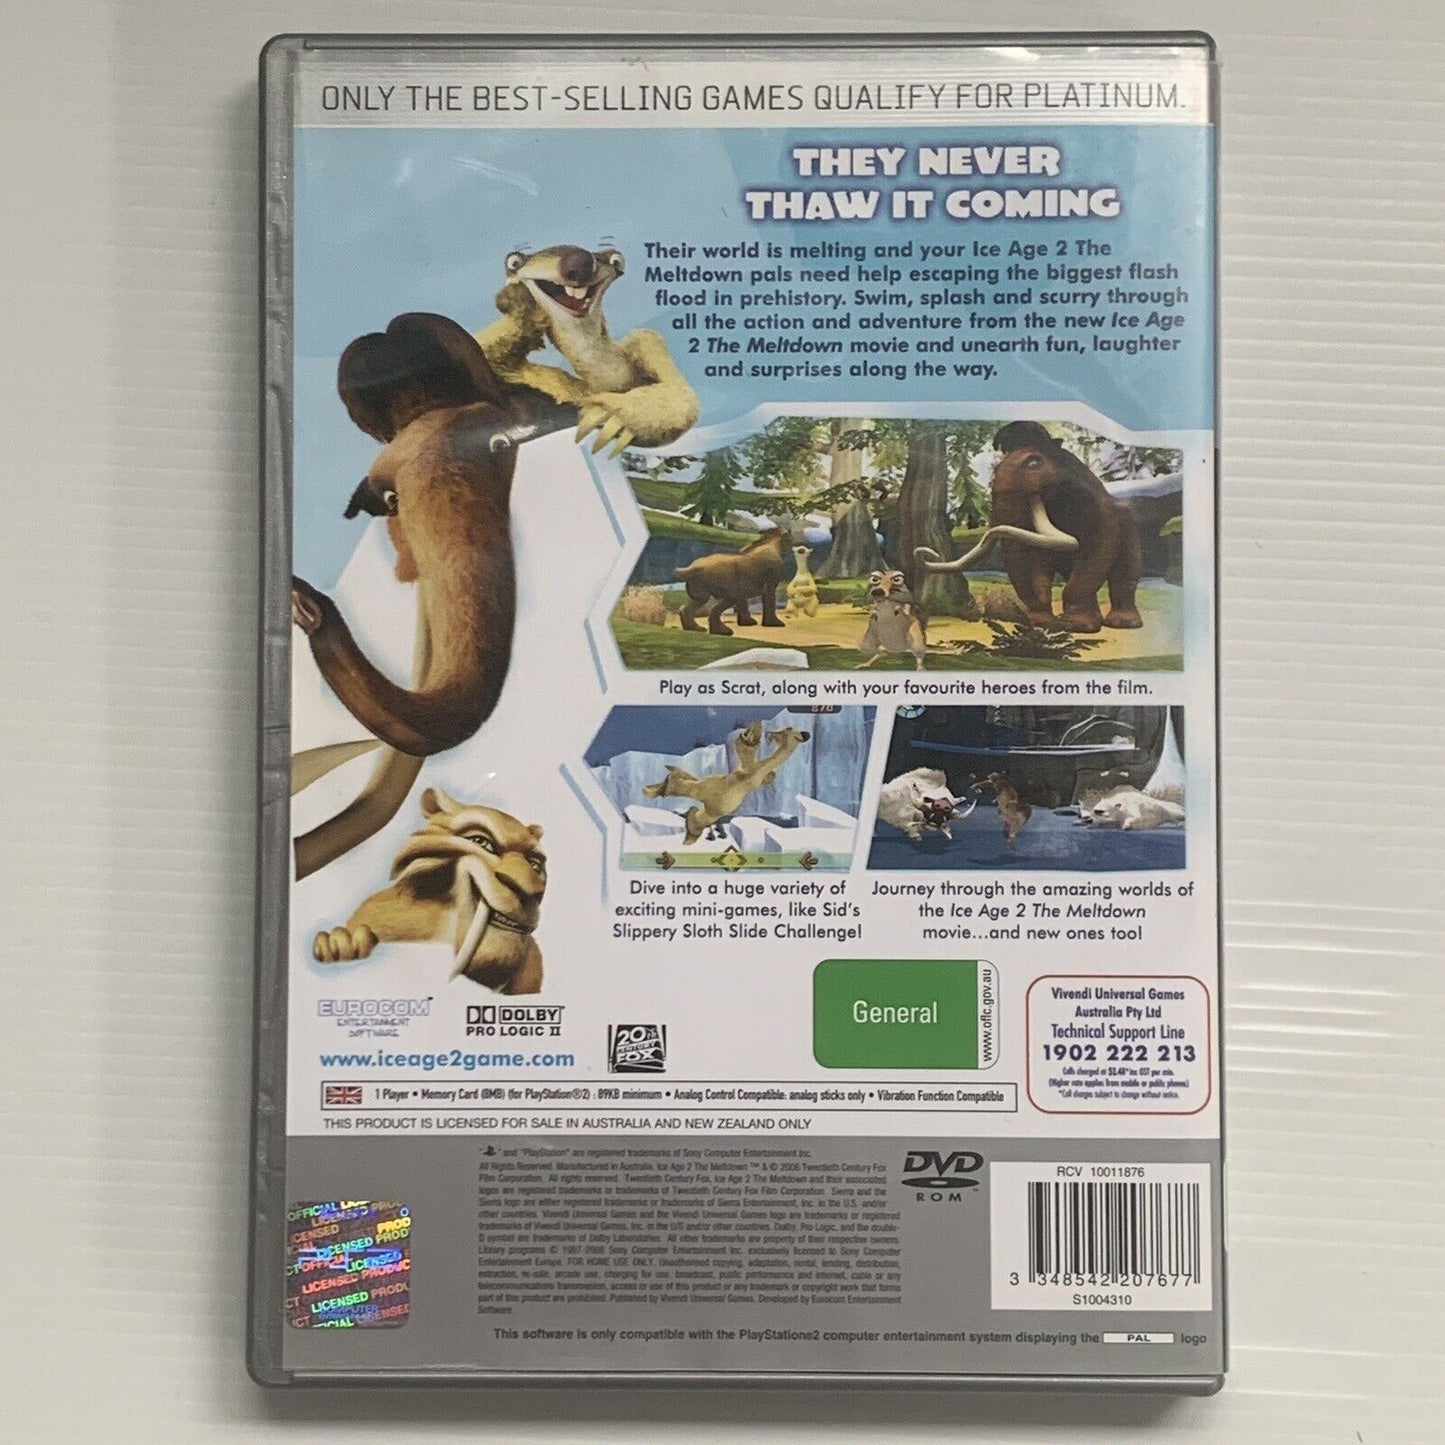 Ice Age 2 The Meltdown PlayStation 2 PS2 Game